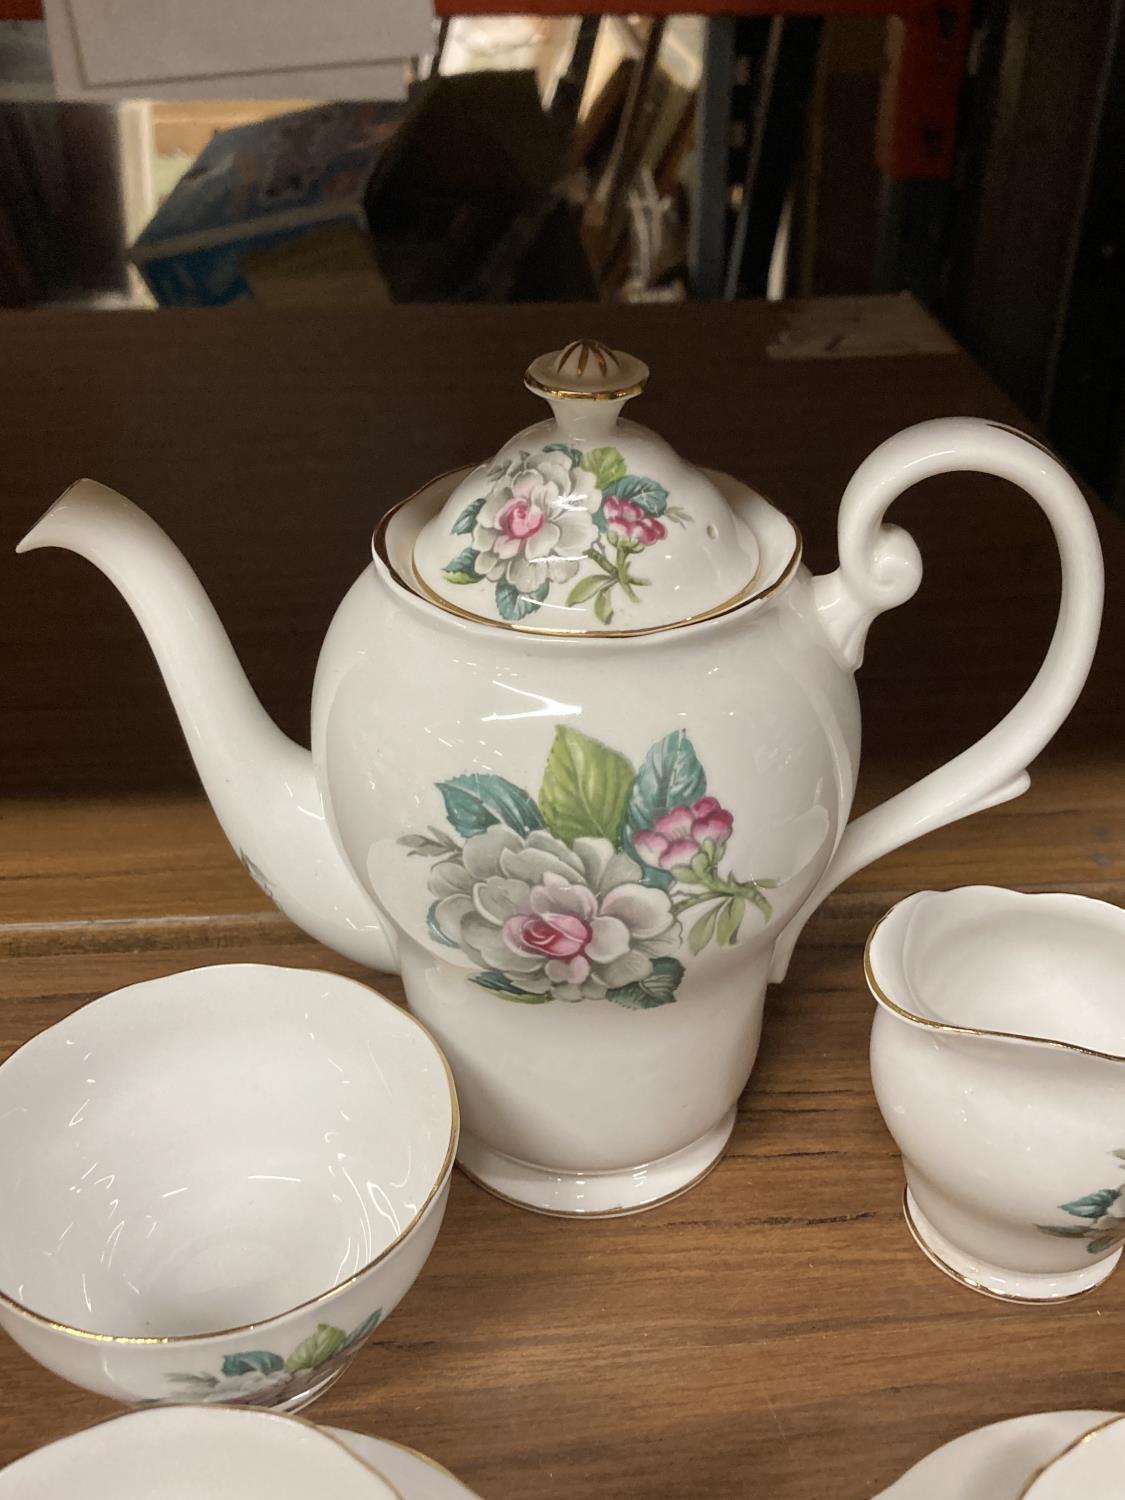 A BONE CHINA COFFEE SET WITH FLORAL DECORATION TO INCLUDE COFFEE SET, CREAM JUG, SUGAR BOWL, CUPS - Image 5 of 6